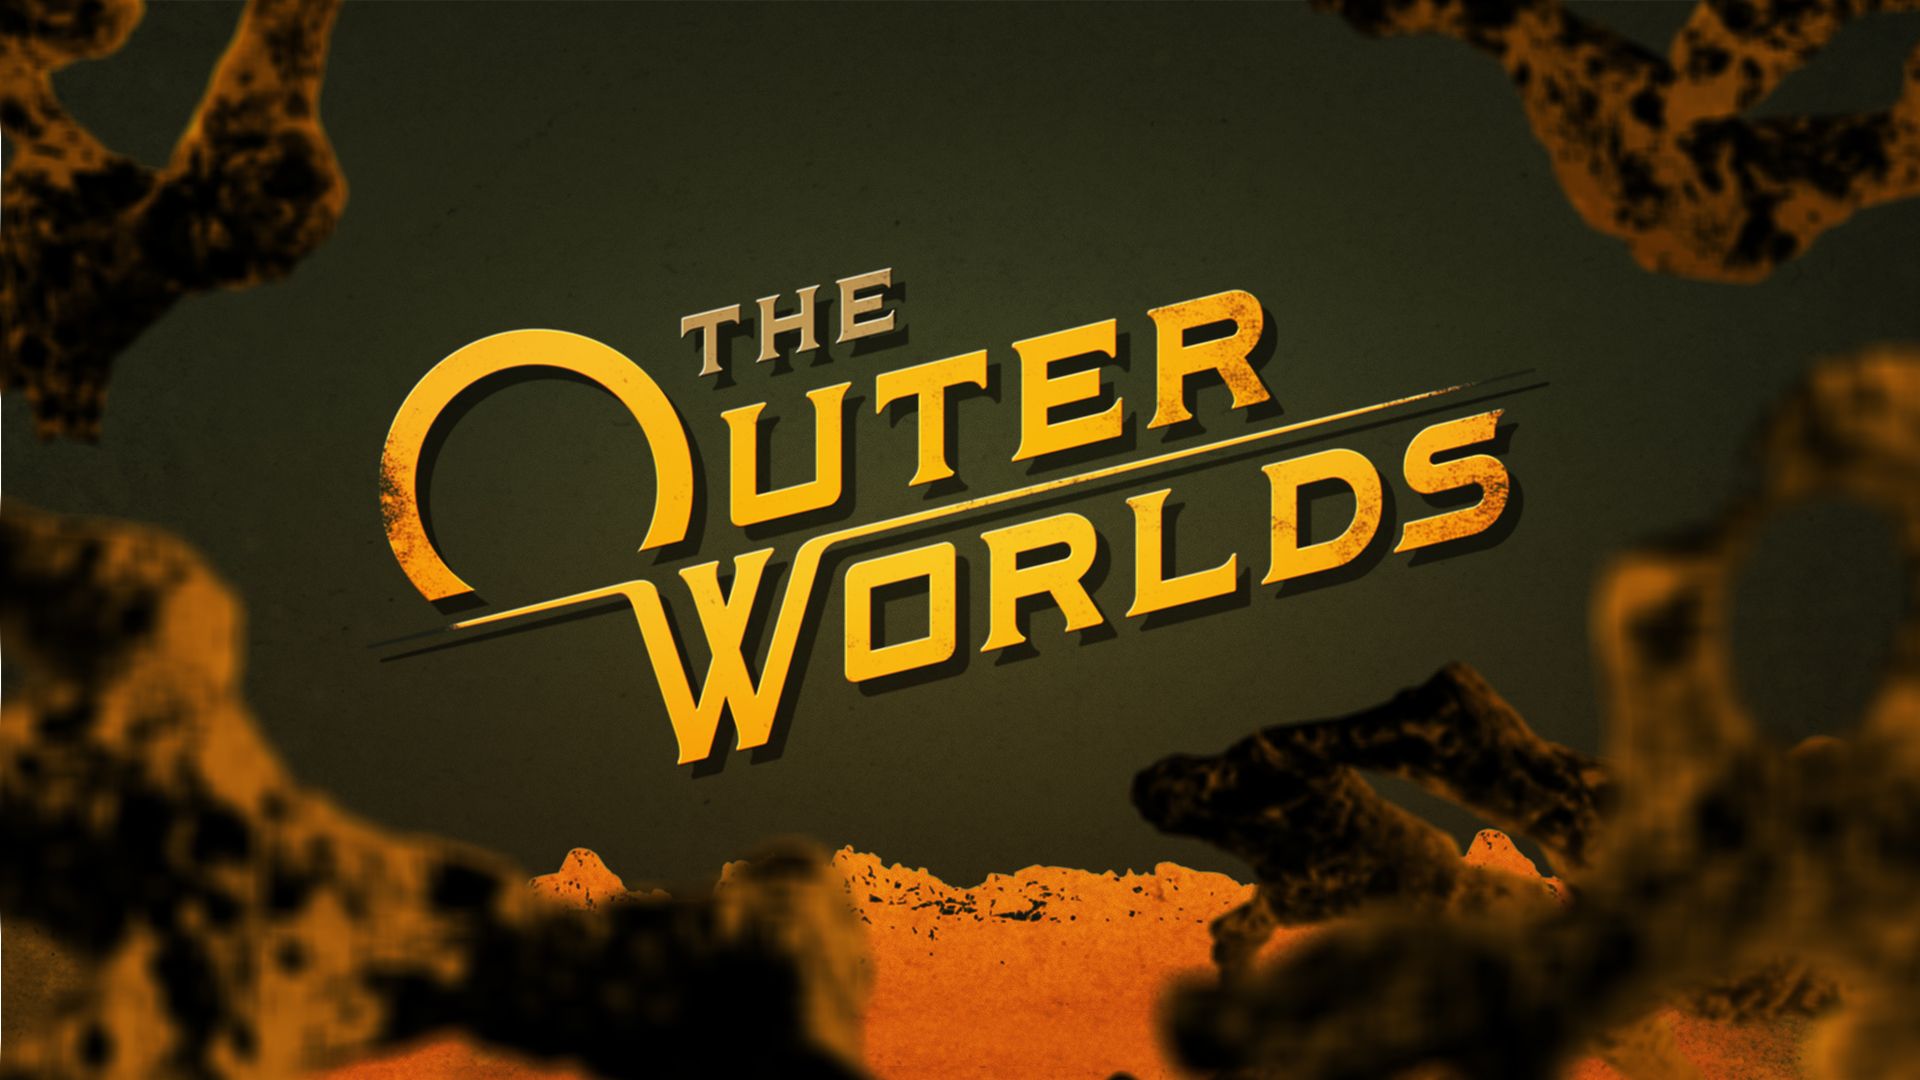 the outer worlds switch pre order